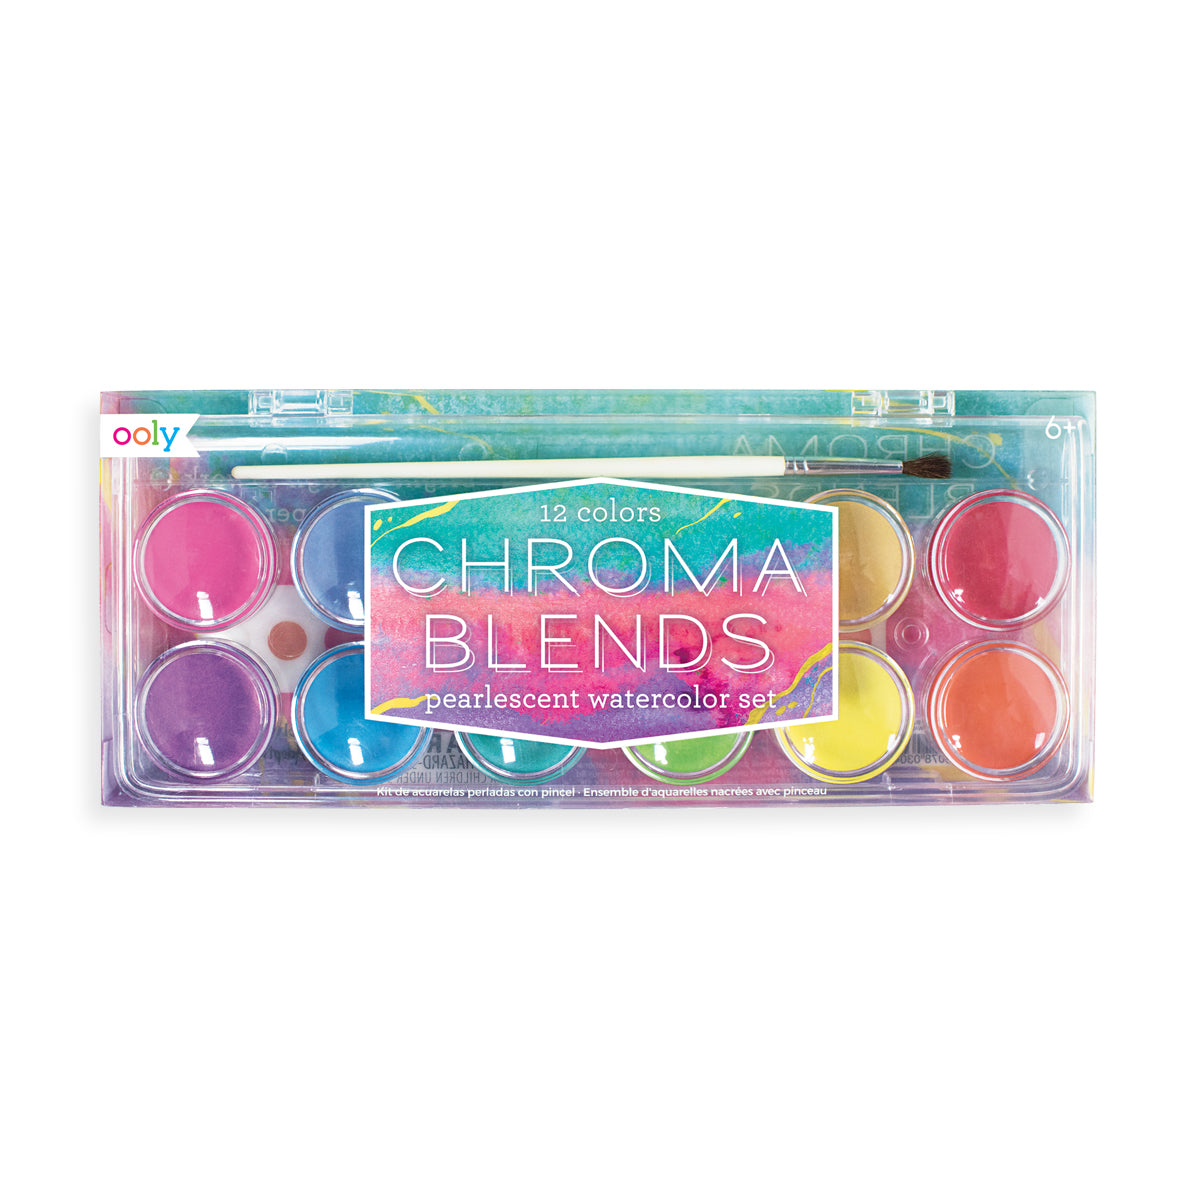 Ooly Chroma Blends Watercolor Paint +Brush (Pearlescent)